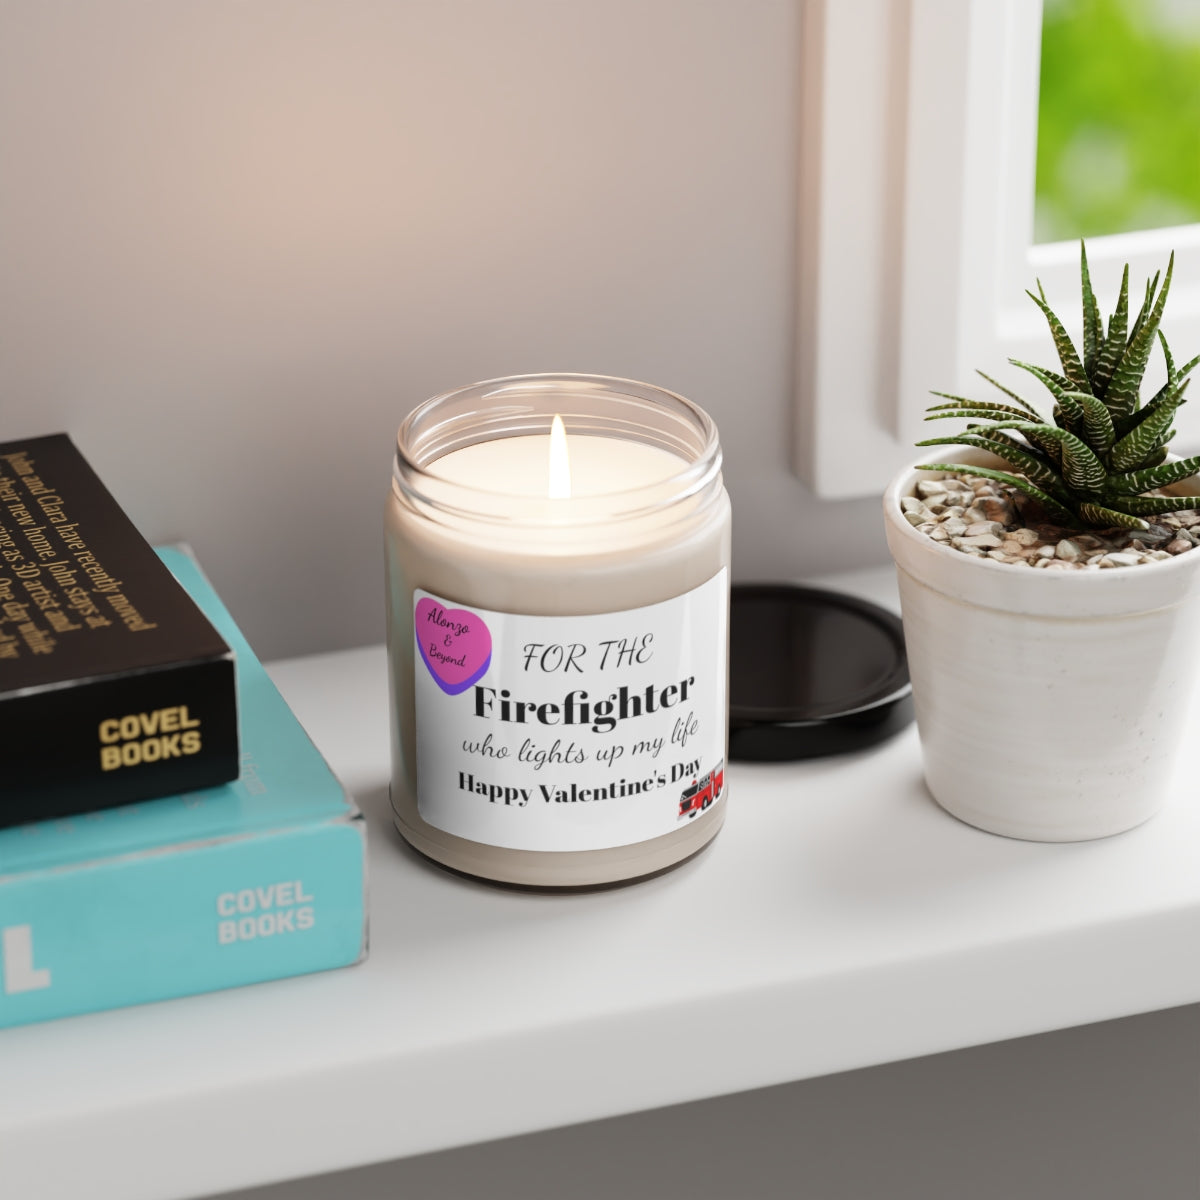 Firefighter Who lights up my life -Valentine's Day Gift- Scented Soy Candle, 9oz